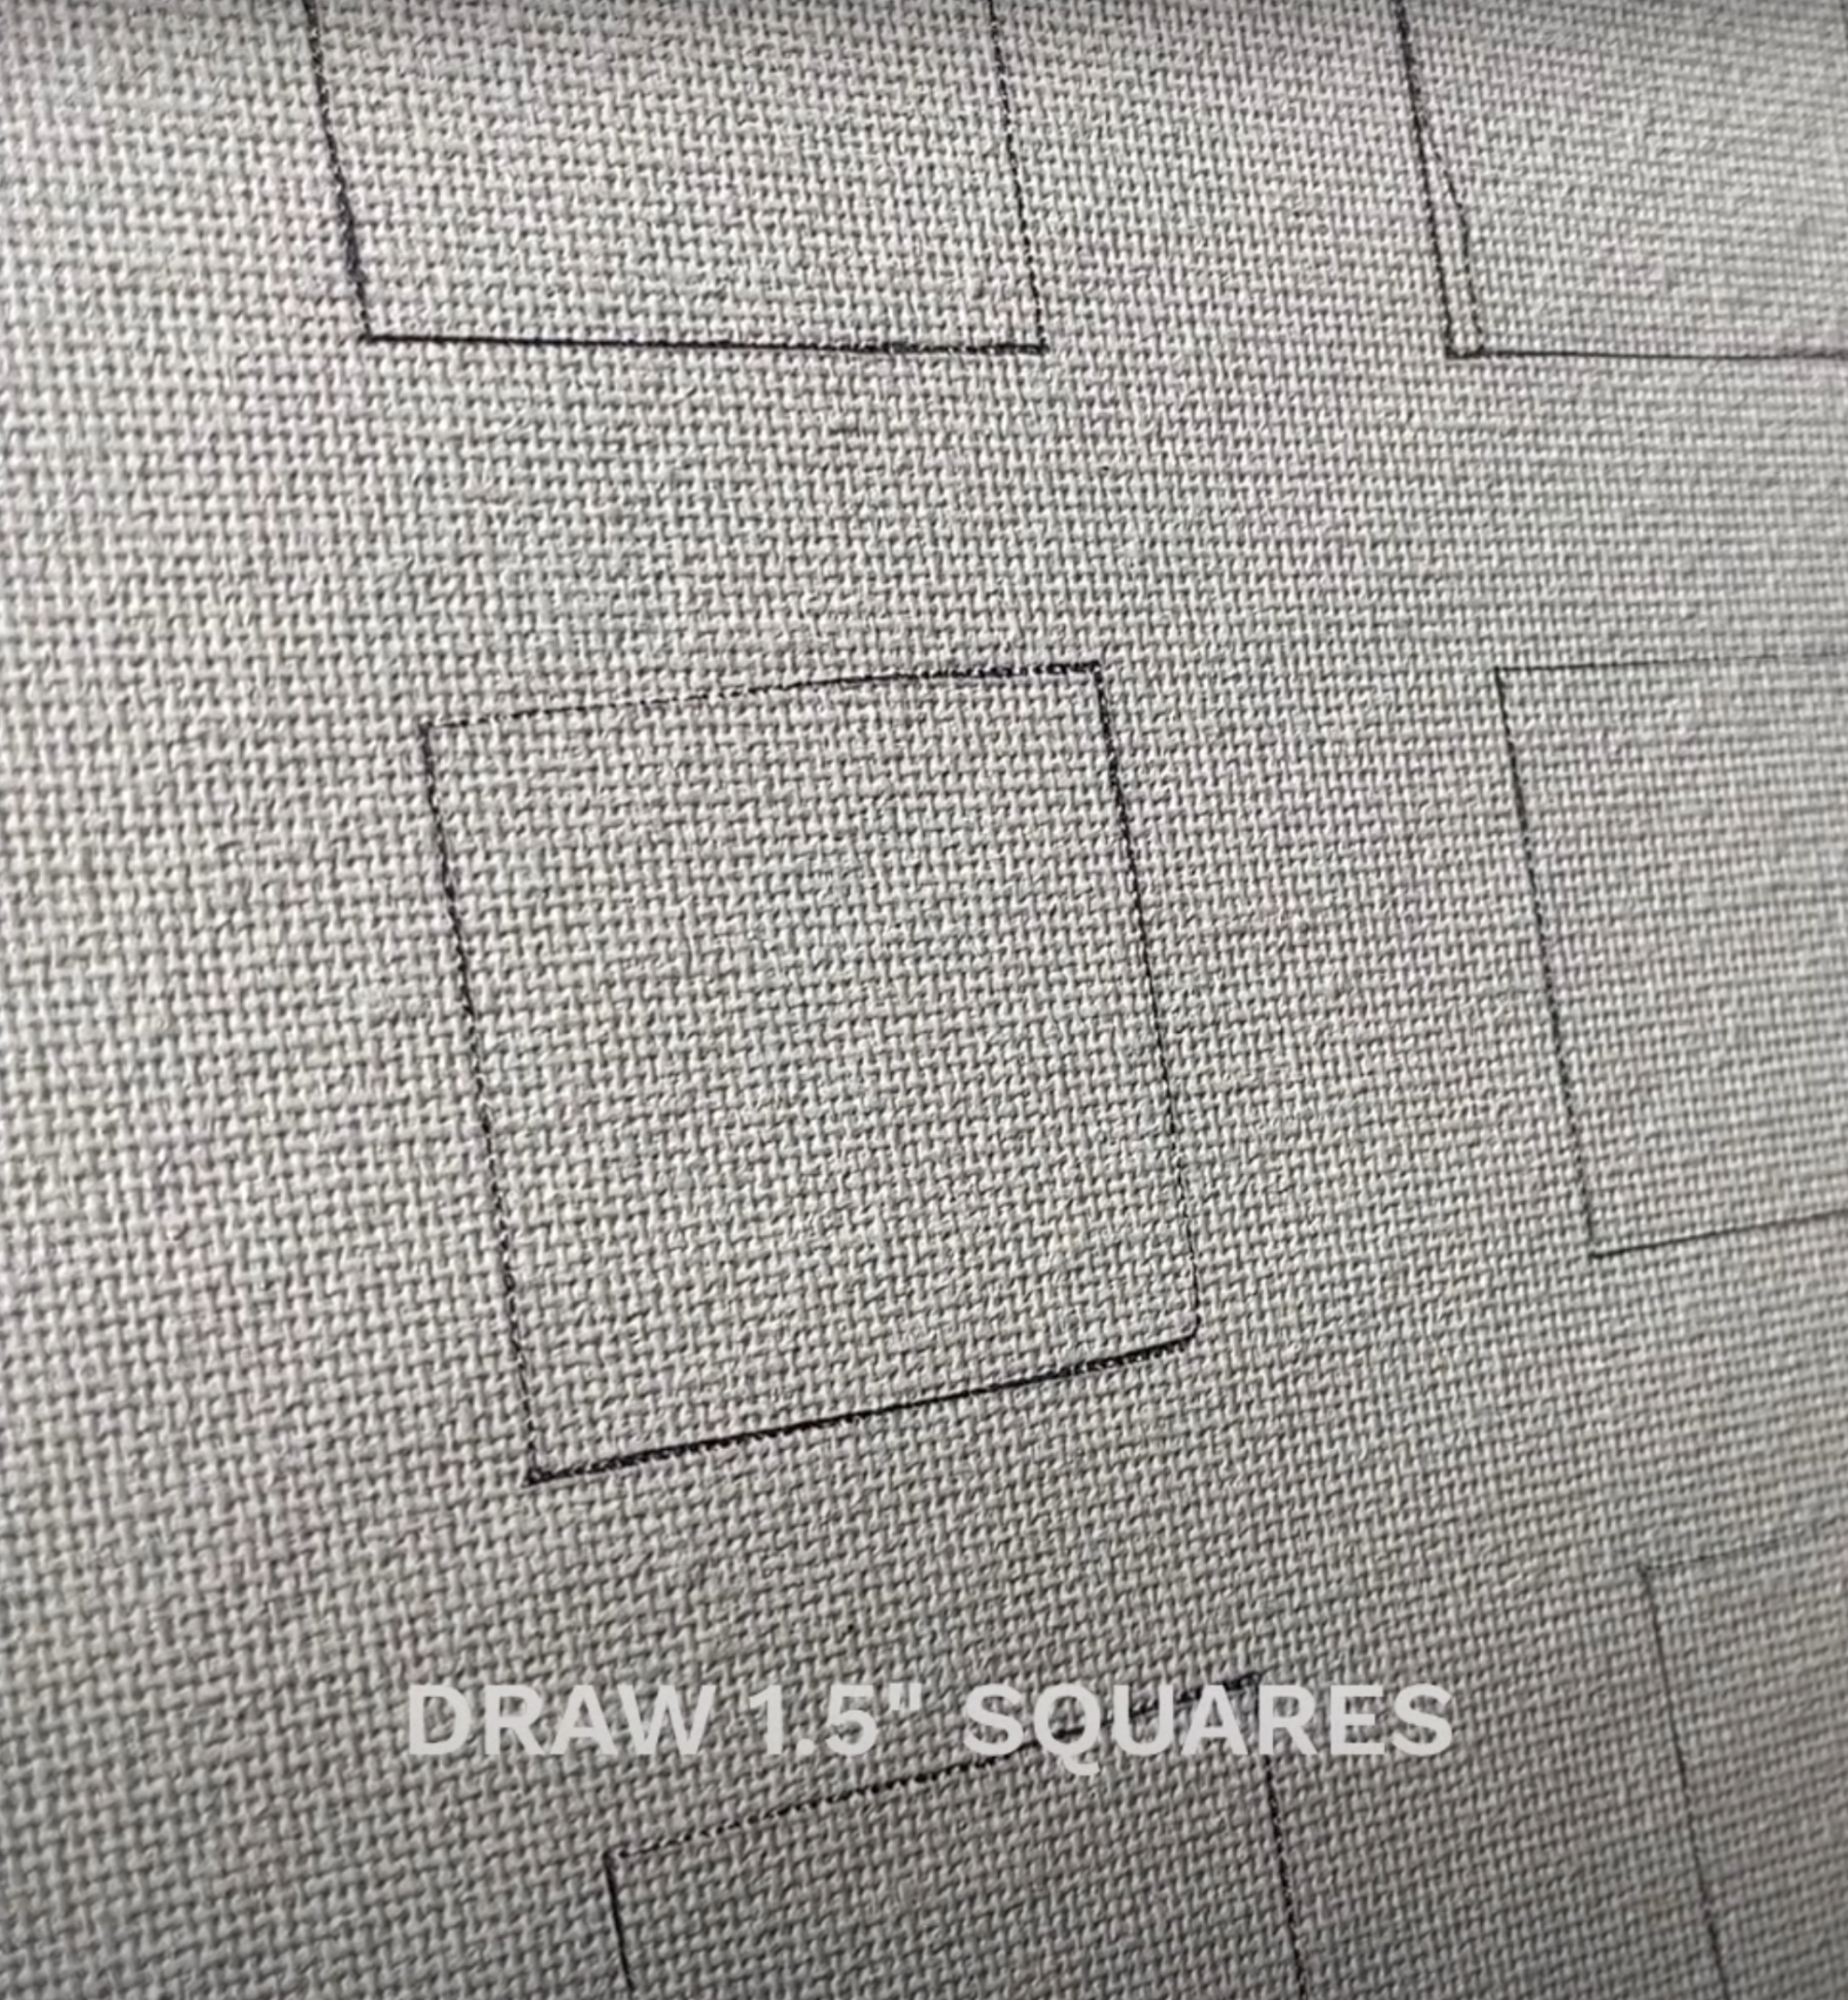 Oil Painting for Beginners, Draw 1.5" Squares